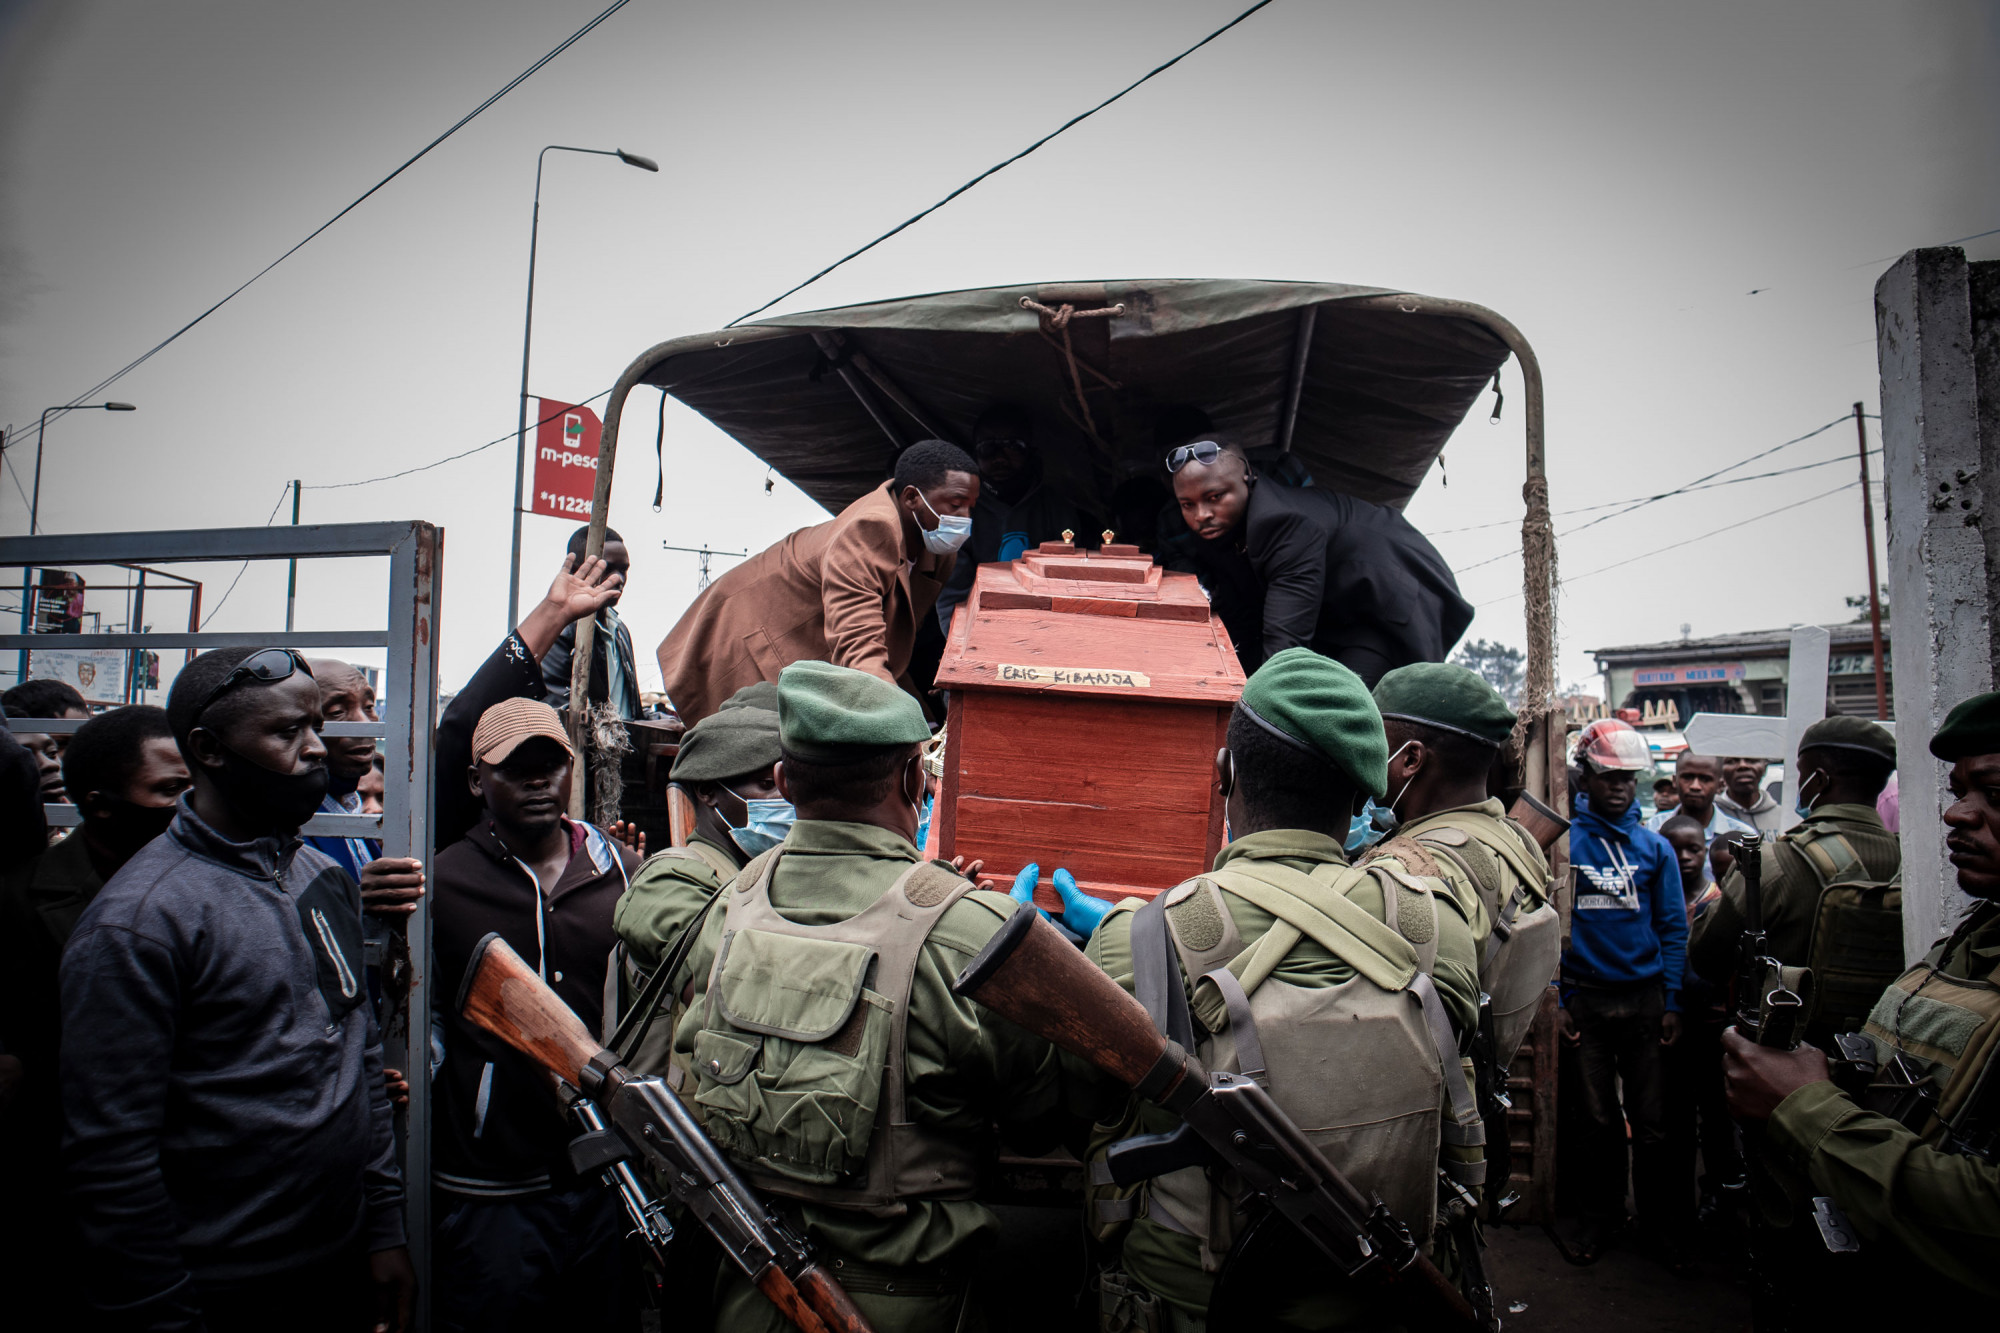 Goma, DRC, January 2021. The casket of Eric Kibanja is transported to the cemetery. © Guerchom Ndebo for Fondation Carmignac